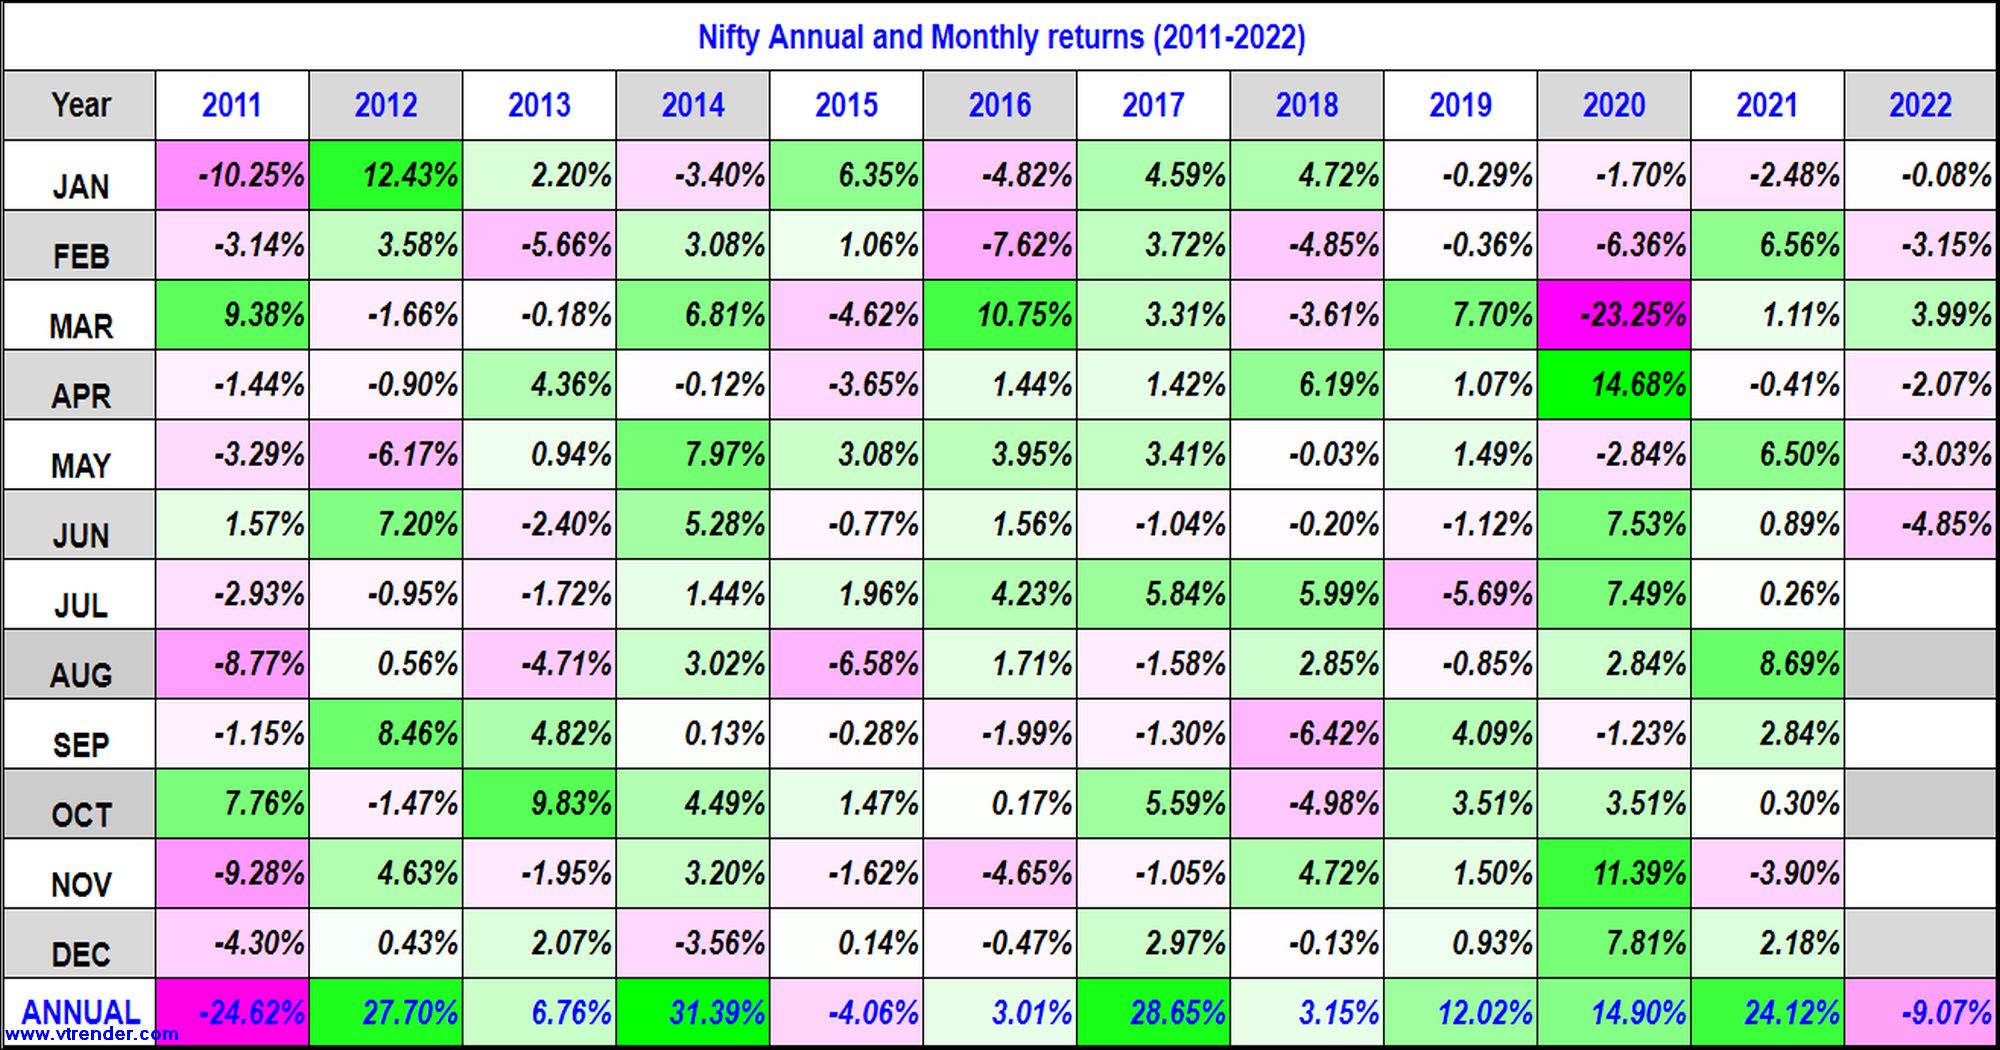 Niftyreturns30Jun Nifty 50 Monthly And Annual Returns (1991-2022) - 30Th Jun 2022 Annual, Monthly, Nifty Returns